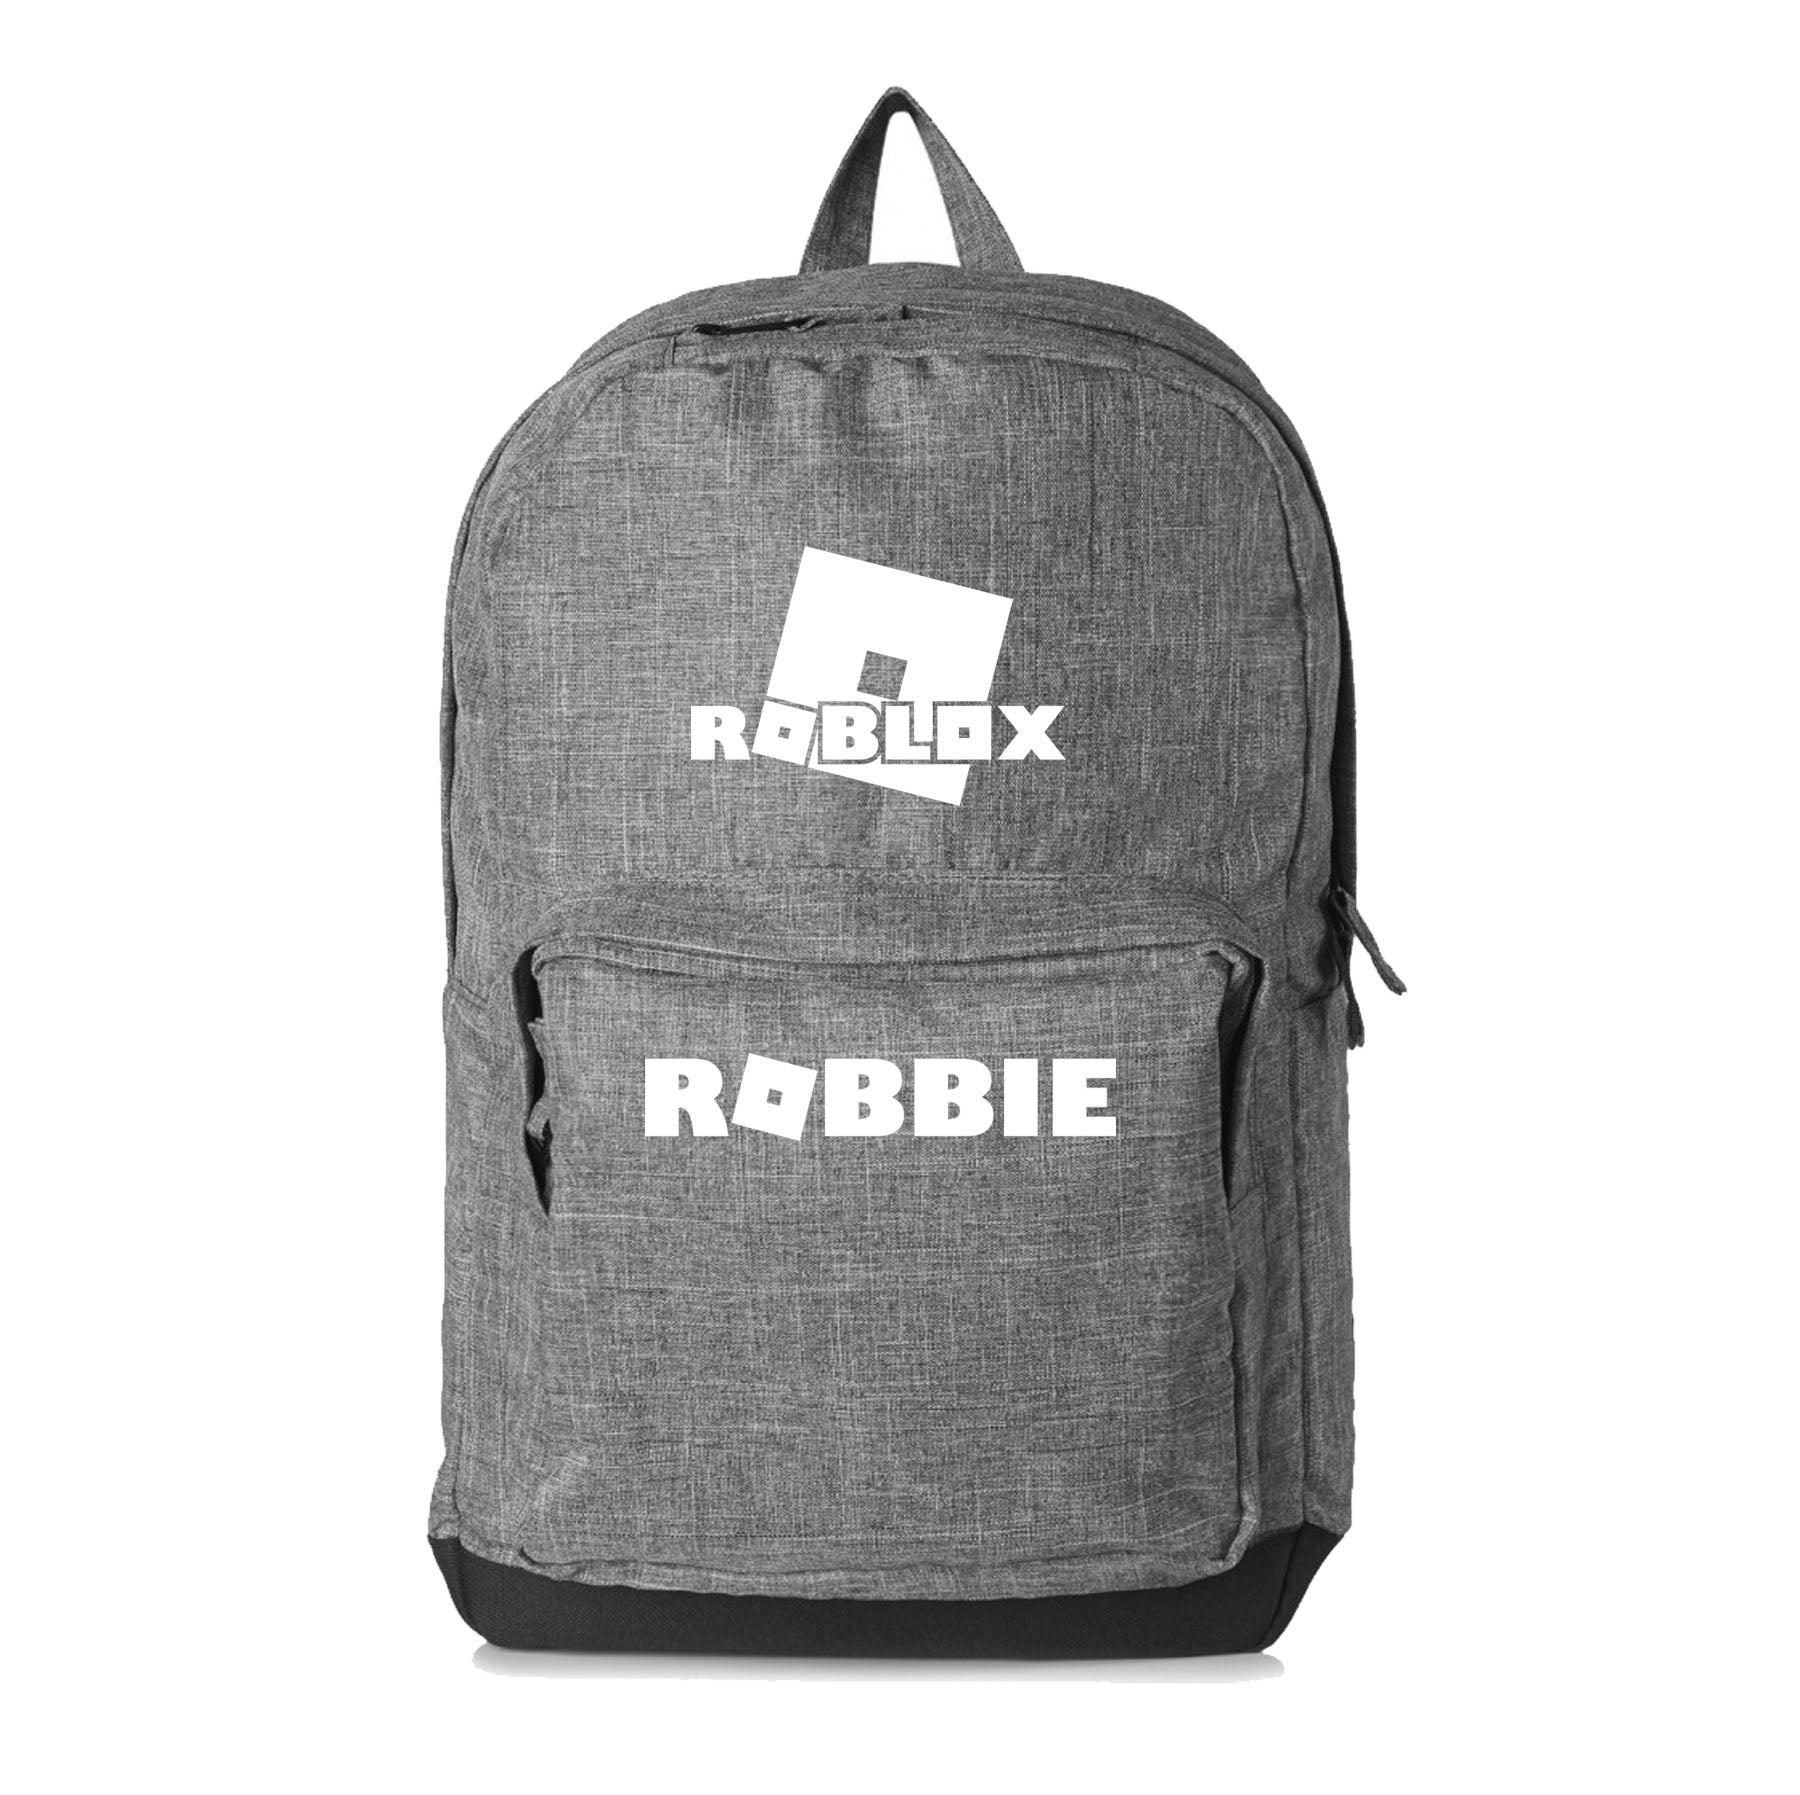 Roblox Bag Metro Backpack Fortee Apparel - roblox backpack free